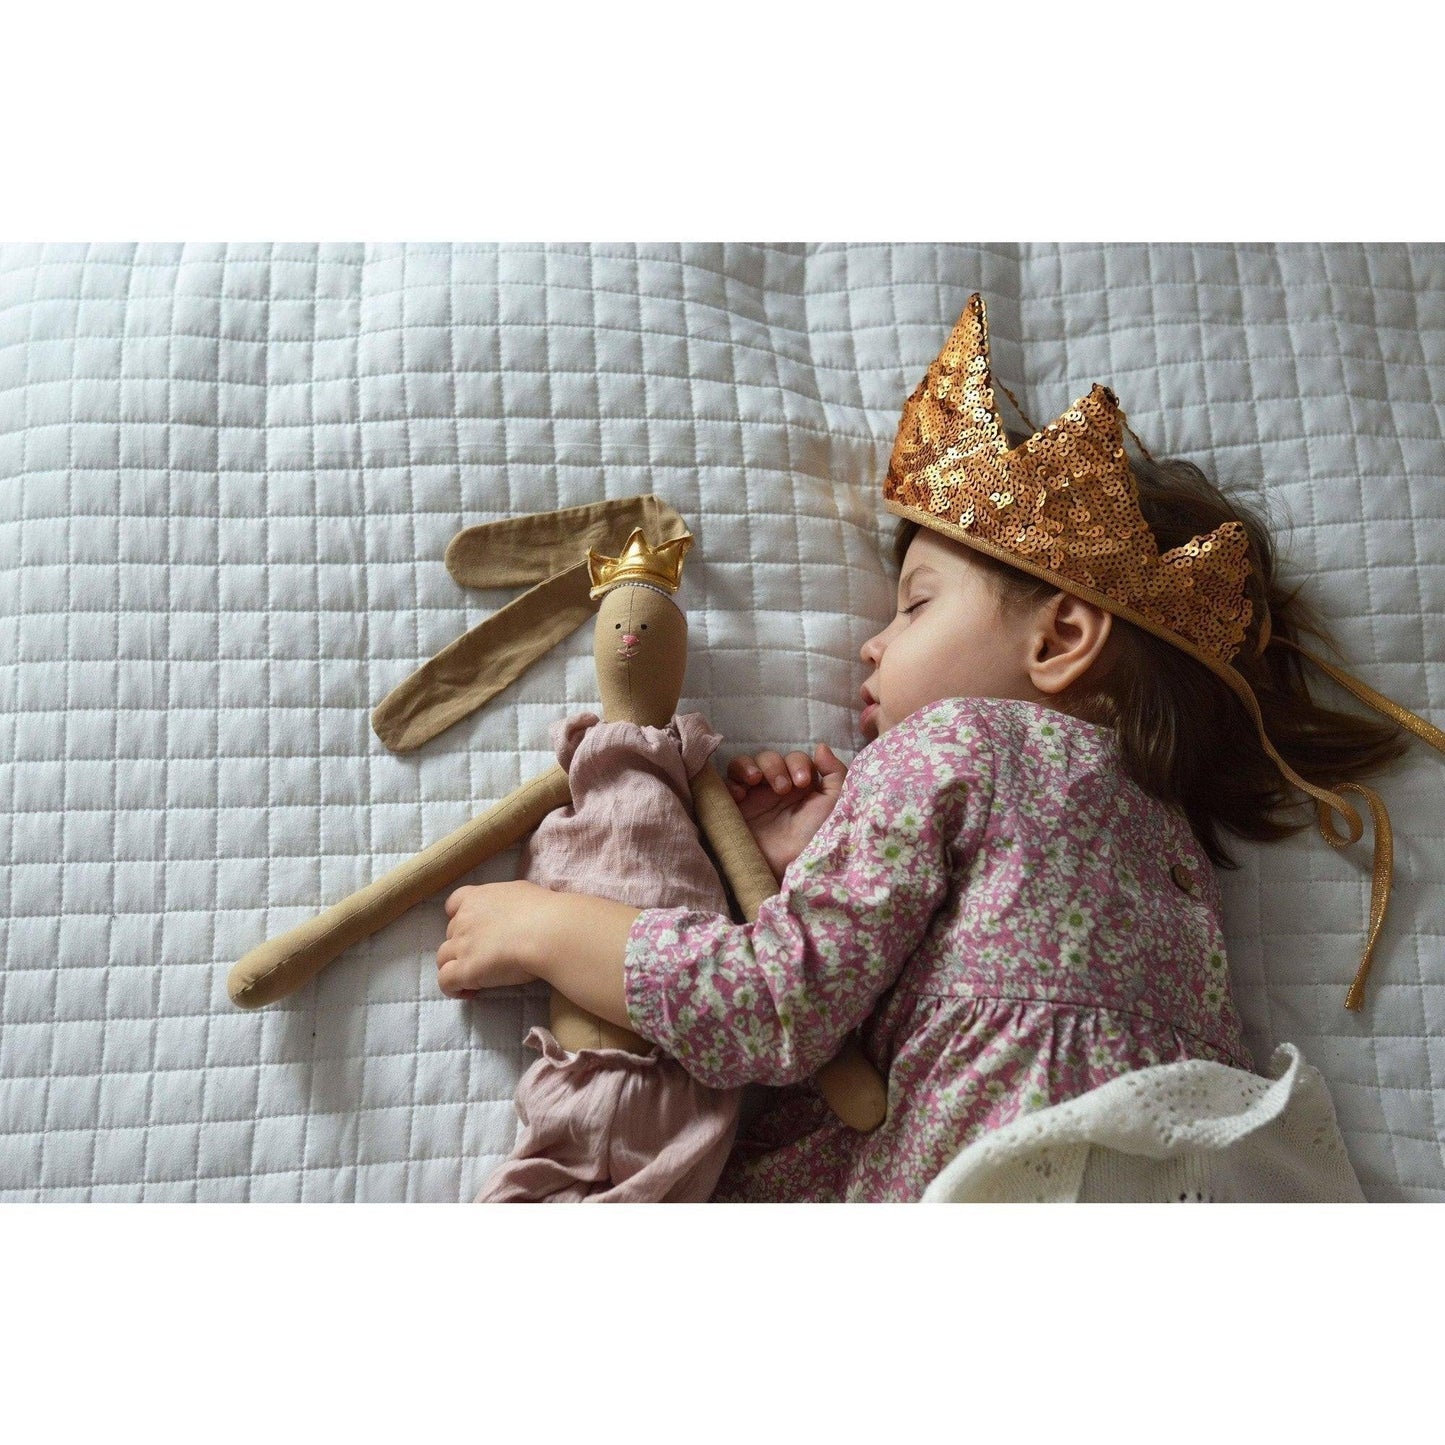 “Gold Sequins” Crown & Wand Magic Set by Moi Mili